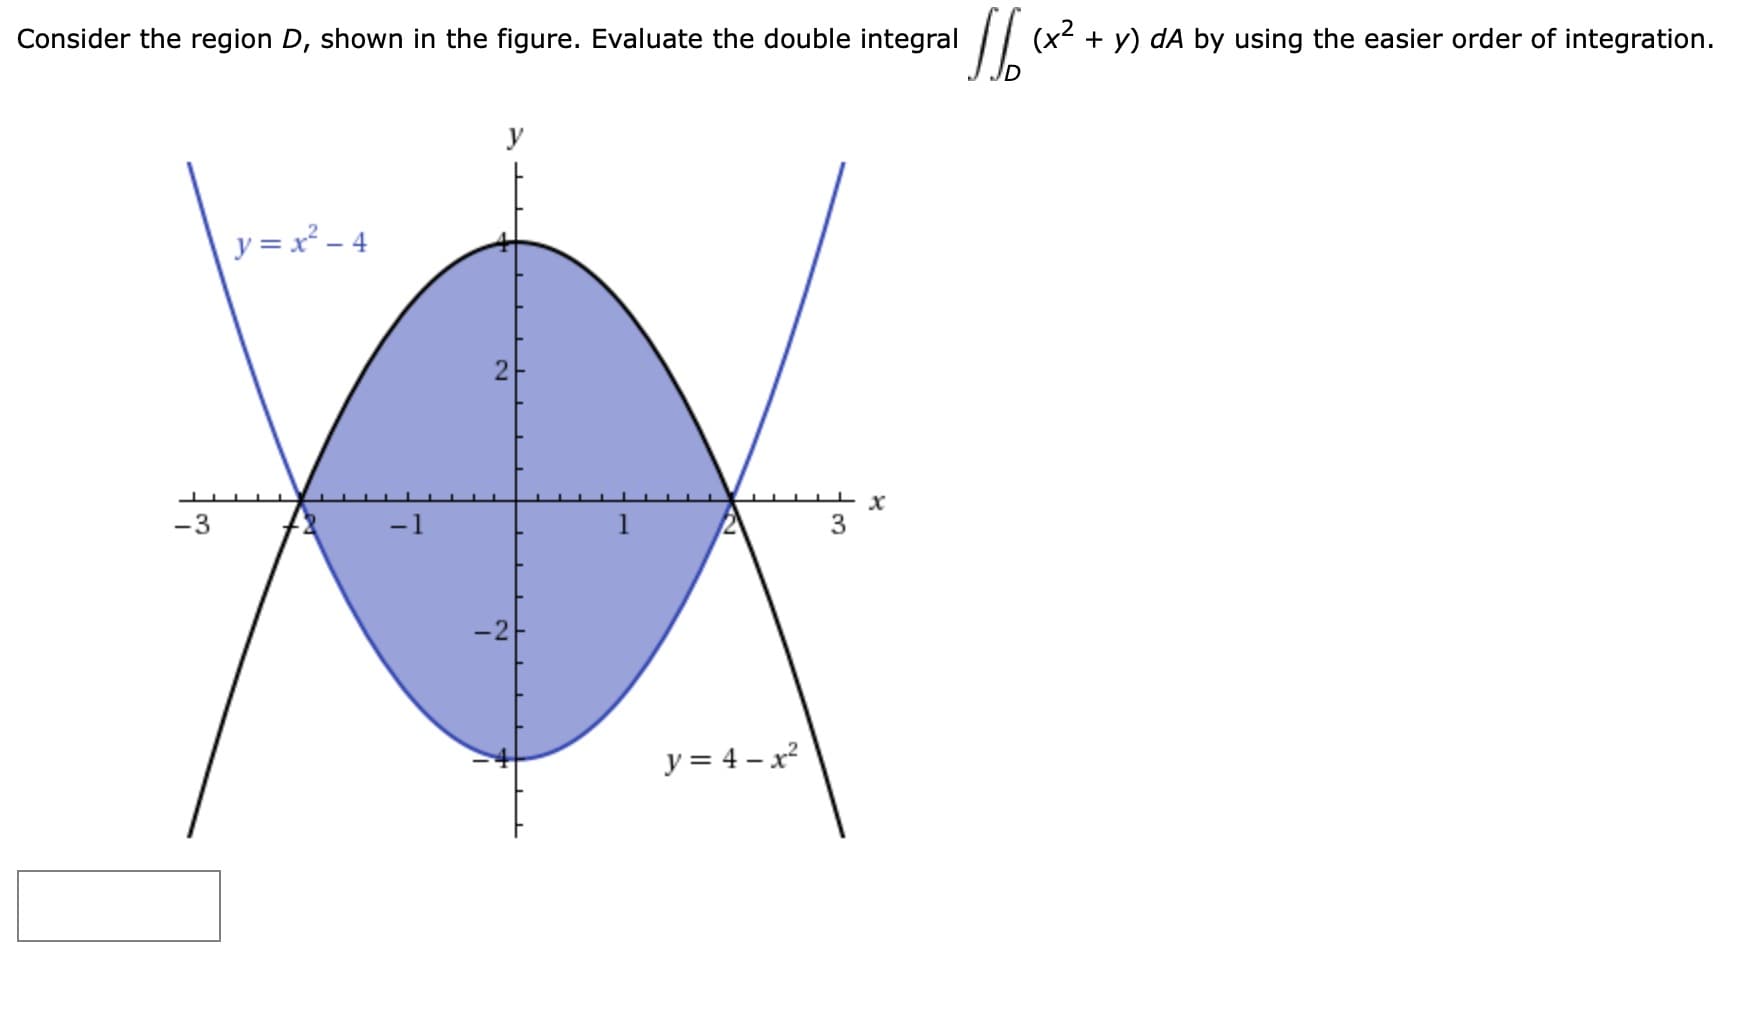 Consider the region D, shown in the figure. Evaluate the double integral | (x + y) dA by using the easier order of integration.
